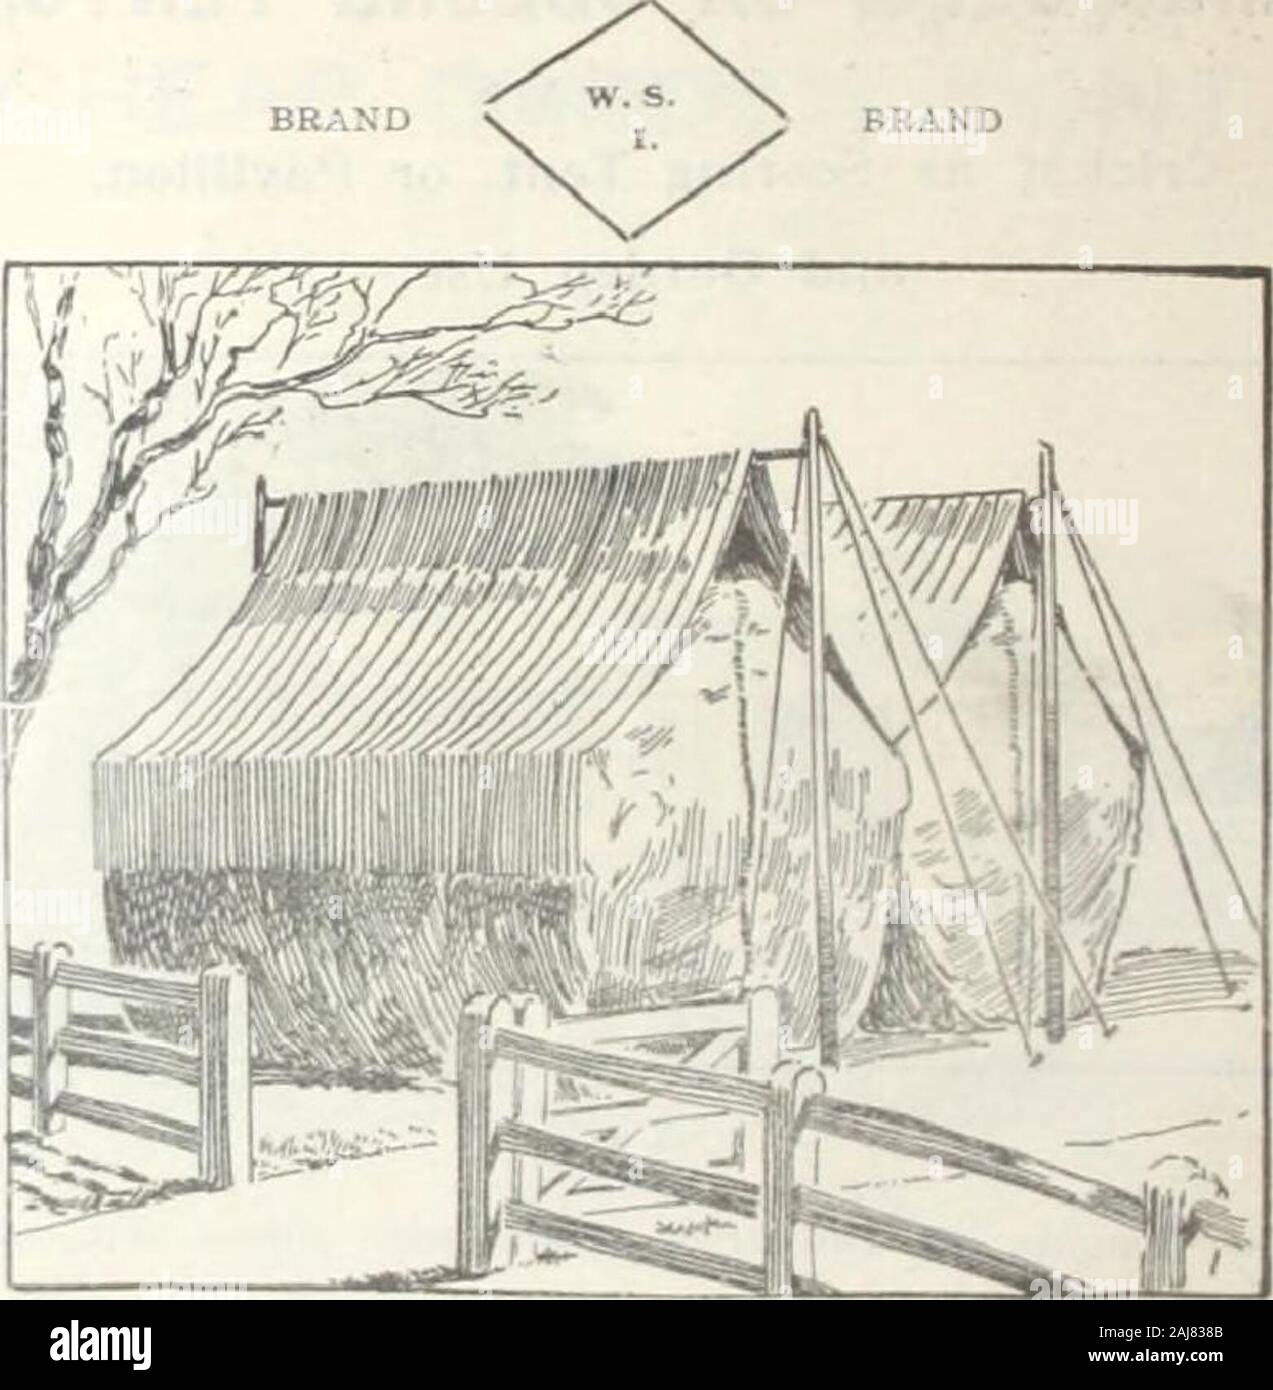 Wrinch & Sons garden furniture and requisites. . T) trong i entre pole-, and is sent &gt;ui mplete with p pegs, line- and runners, and dri C ed in vali&gt;e. 18 ft, ? I-1 f. it. x U It. 30 ft. x 1G ft. 40 ft. x 20 ft. Sizes and Prices. Green Waterproof,and Rotproof. £12 lO O 15 lO O 21 IO O 26 IO O 45 O O 1 ? ernmentDuck (Juality. £10 10 O 12 12 O 16 16 O 21 O O 38 IO O Easily and expeditiously erected. Firm in Structure Copyright—enteked at stationfks ia. i . 62 RICK CLOTHS & WAGON COVERS. BRAND BRAND. I i 20 11 • 45 6 7 8OOO 4 00 o 0 o £910121518 0010O0 000 o 0 Tackle for the above. A ... A Stock Photo